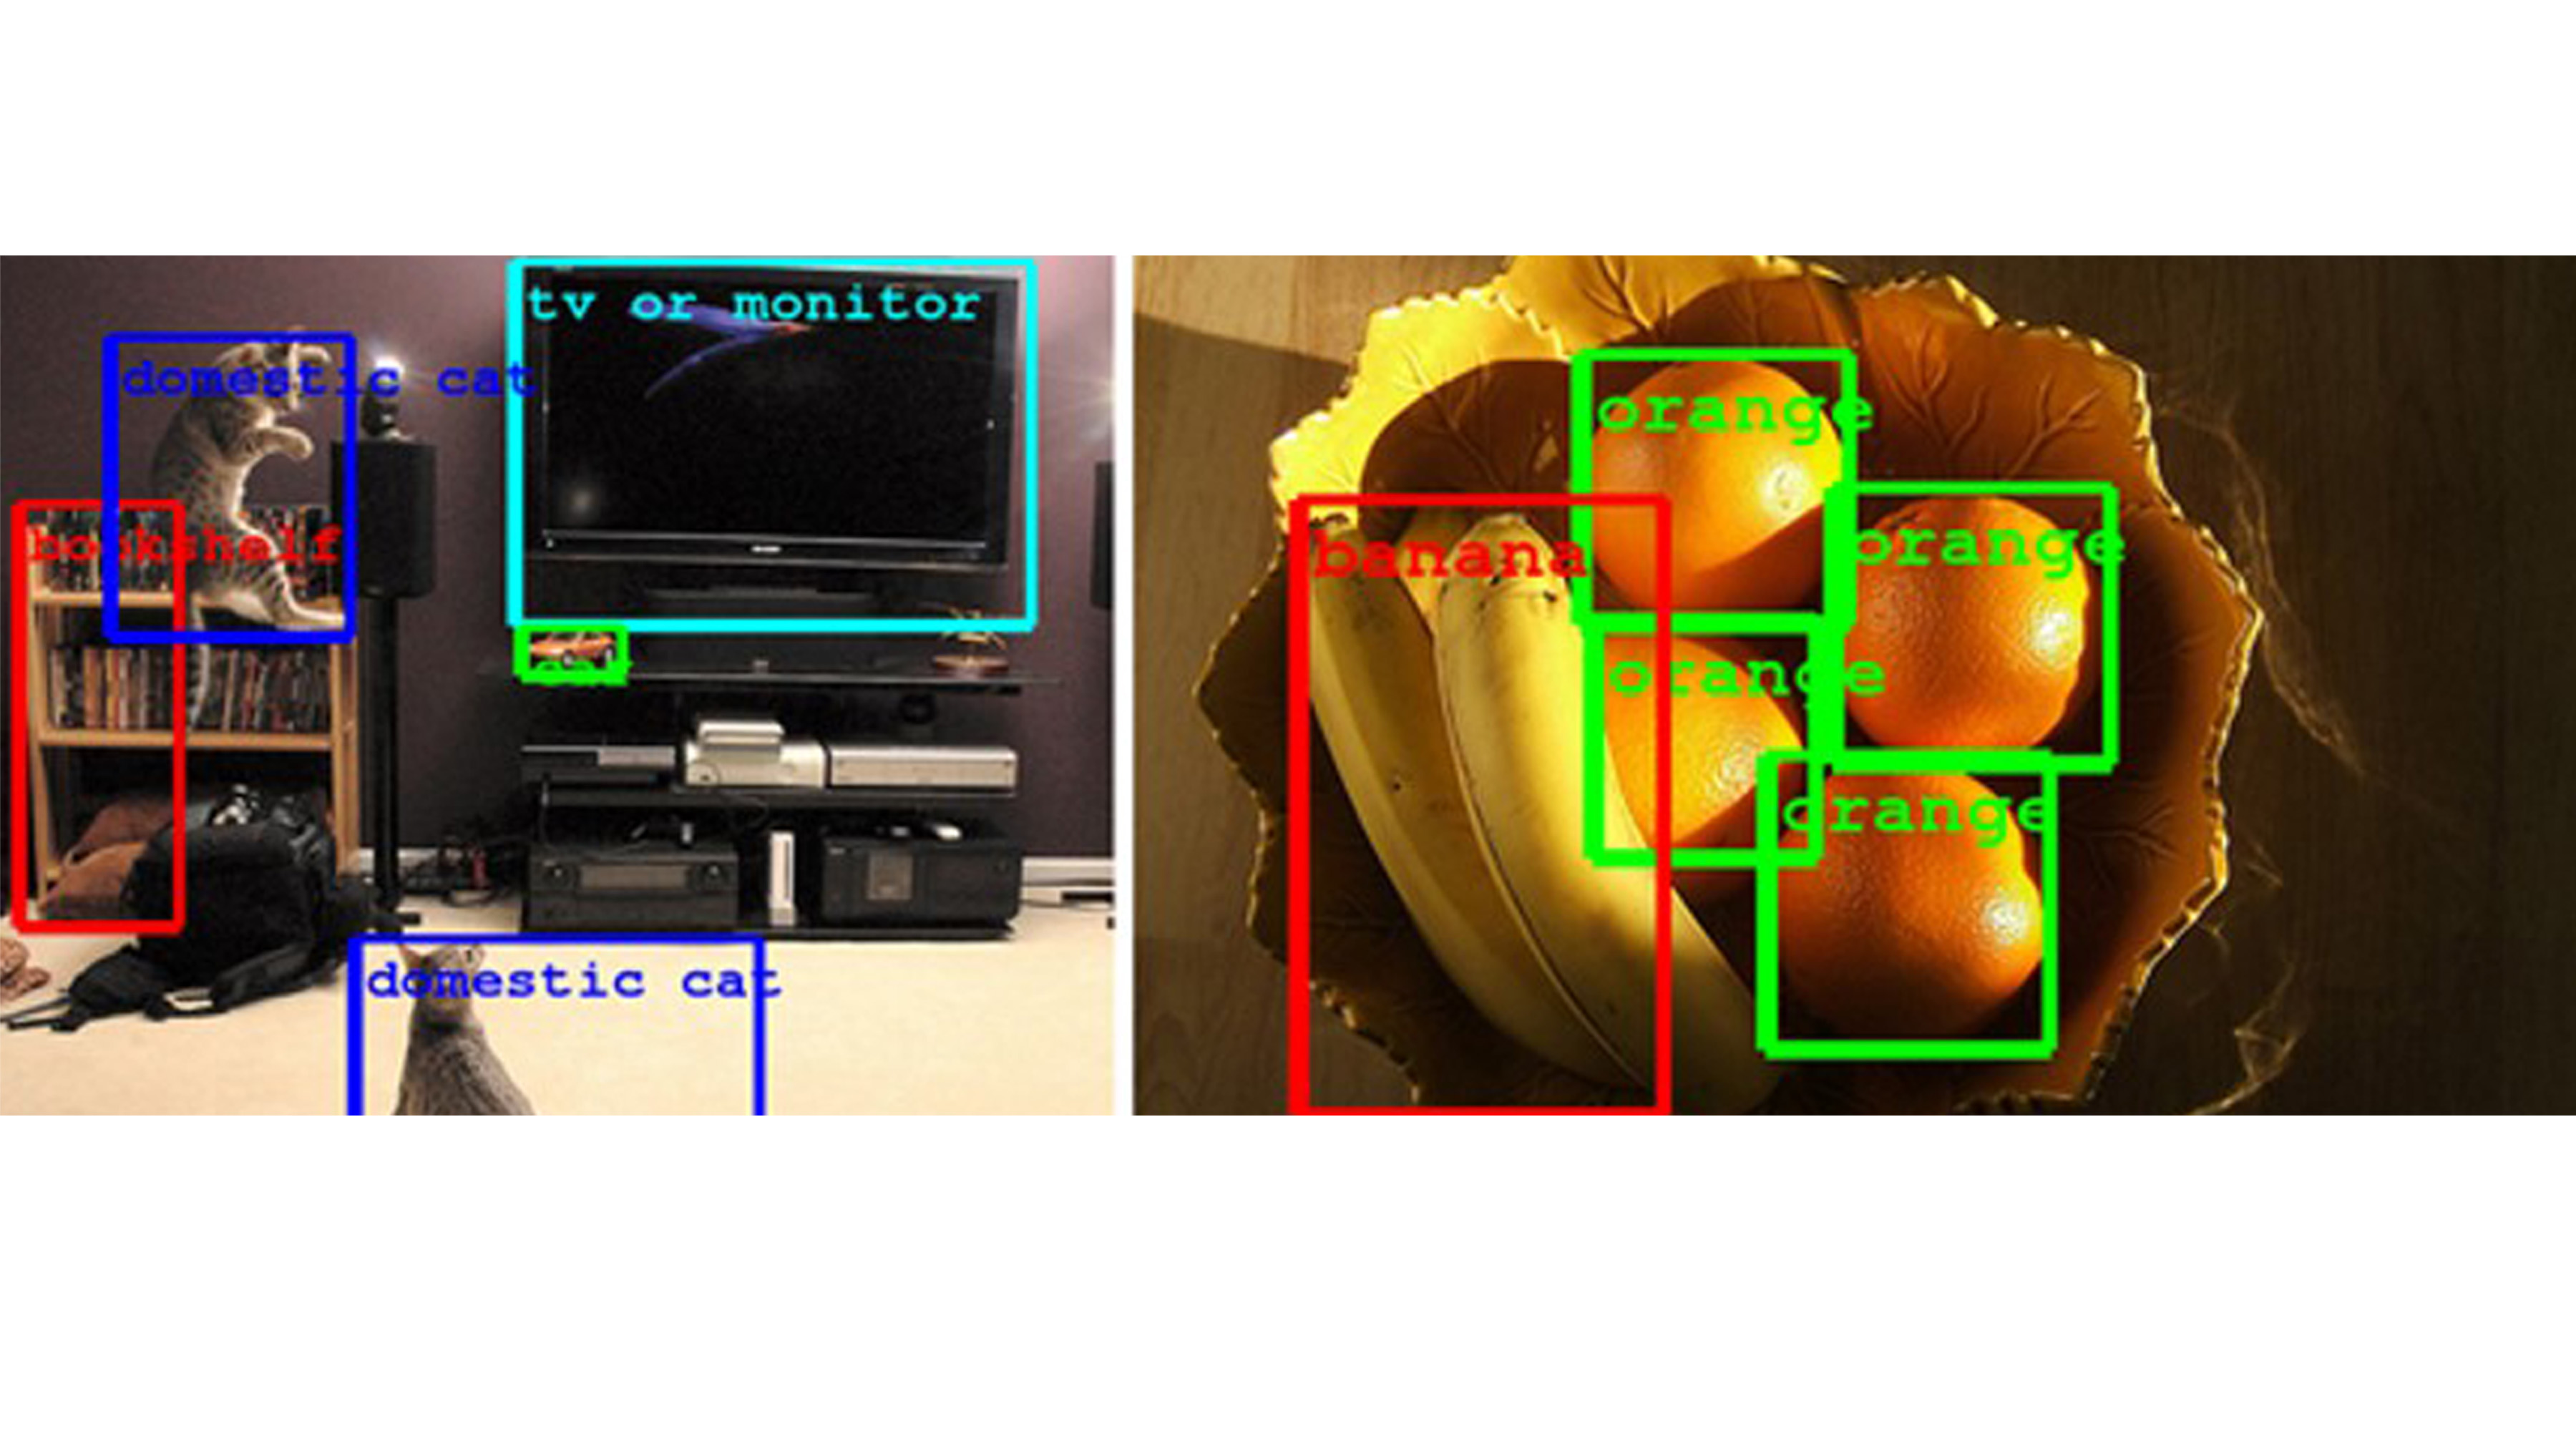 Machine Vision powered by deep learning is being used to detect and identify objects.